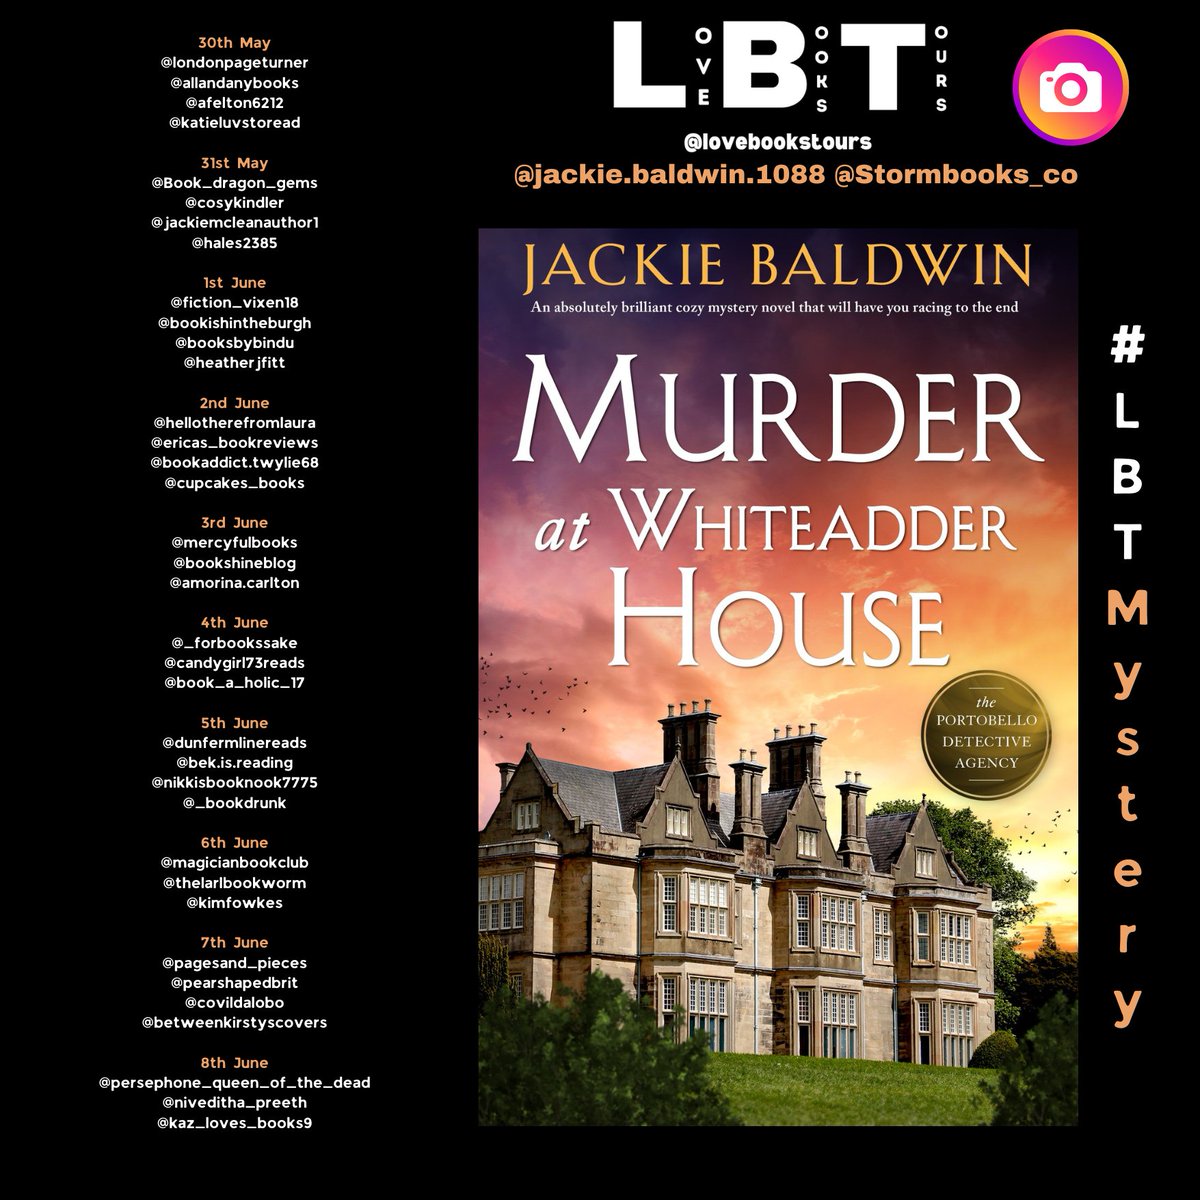 Follow the #Virtualbooktour for Murder at Whiteadder House by Jackie Baldwin from the 30th of May! @JackieMBaldwin1  @Stormbooks_co | Proudly organised by @lovebookstours #BookTour #LBTCrew #Bookreview kellylacey.com/2024/05/14/fol… via @KellyALacey